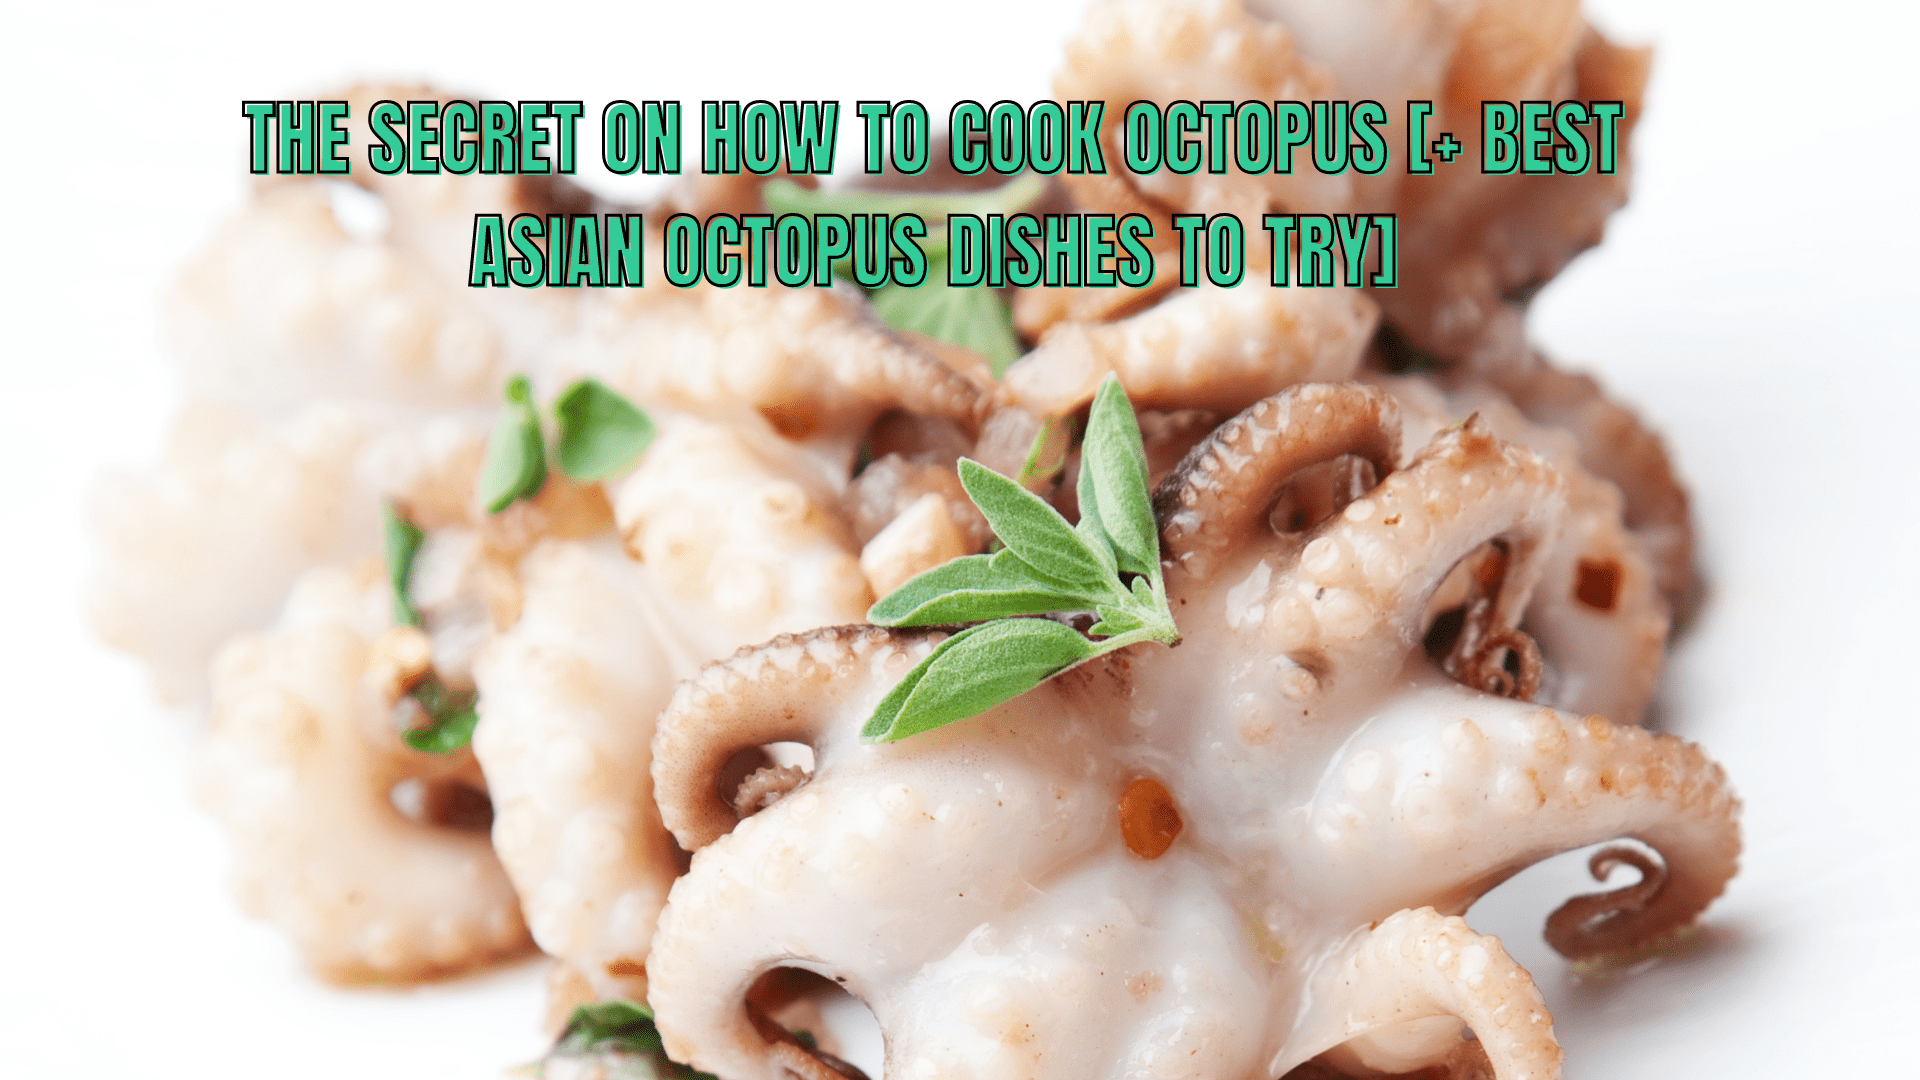 The secret on how to cook octopus [+ best Asian octopus dishes to try]